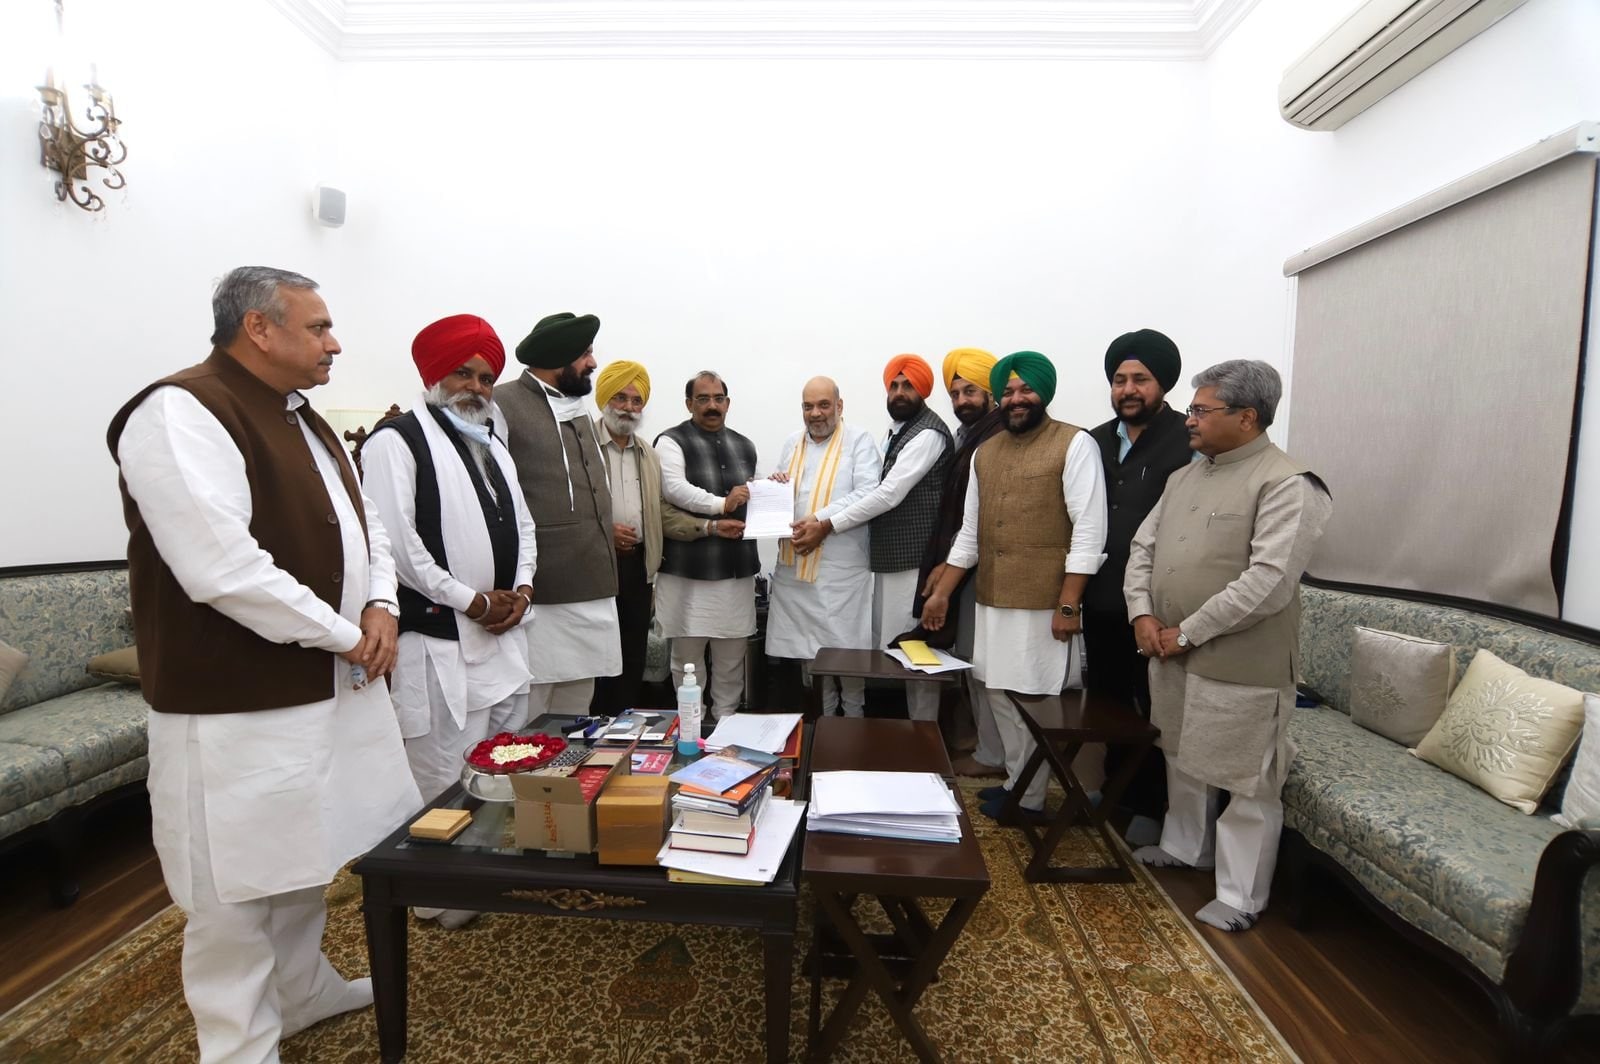 BJP delegation meets Union home minister Amit Shah for the reopening of Kartarpur corridor. (Twitter/@ANI)